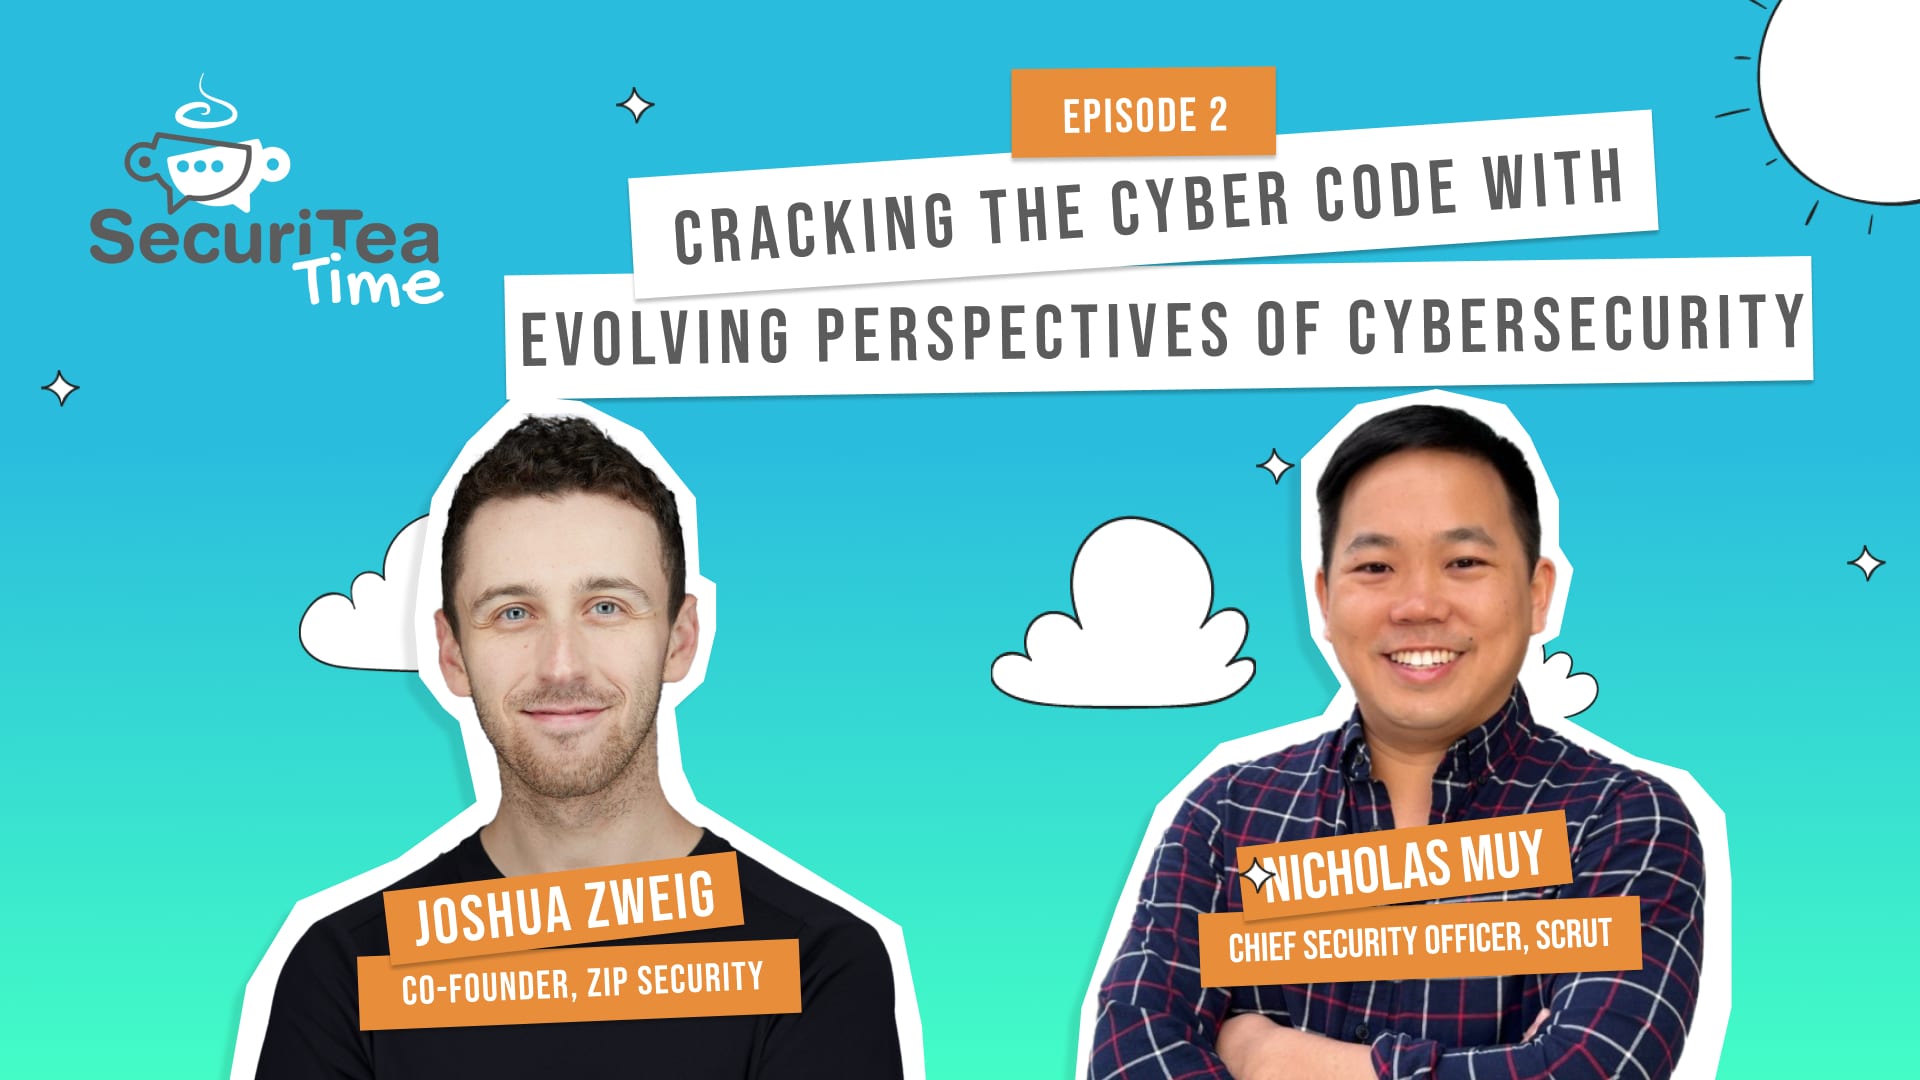 Cracking the Cyber Code with Evolving Perspectives of Cybersecurity